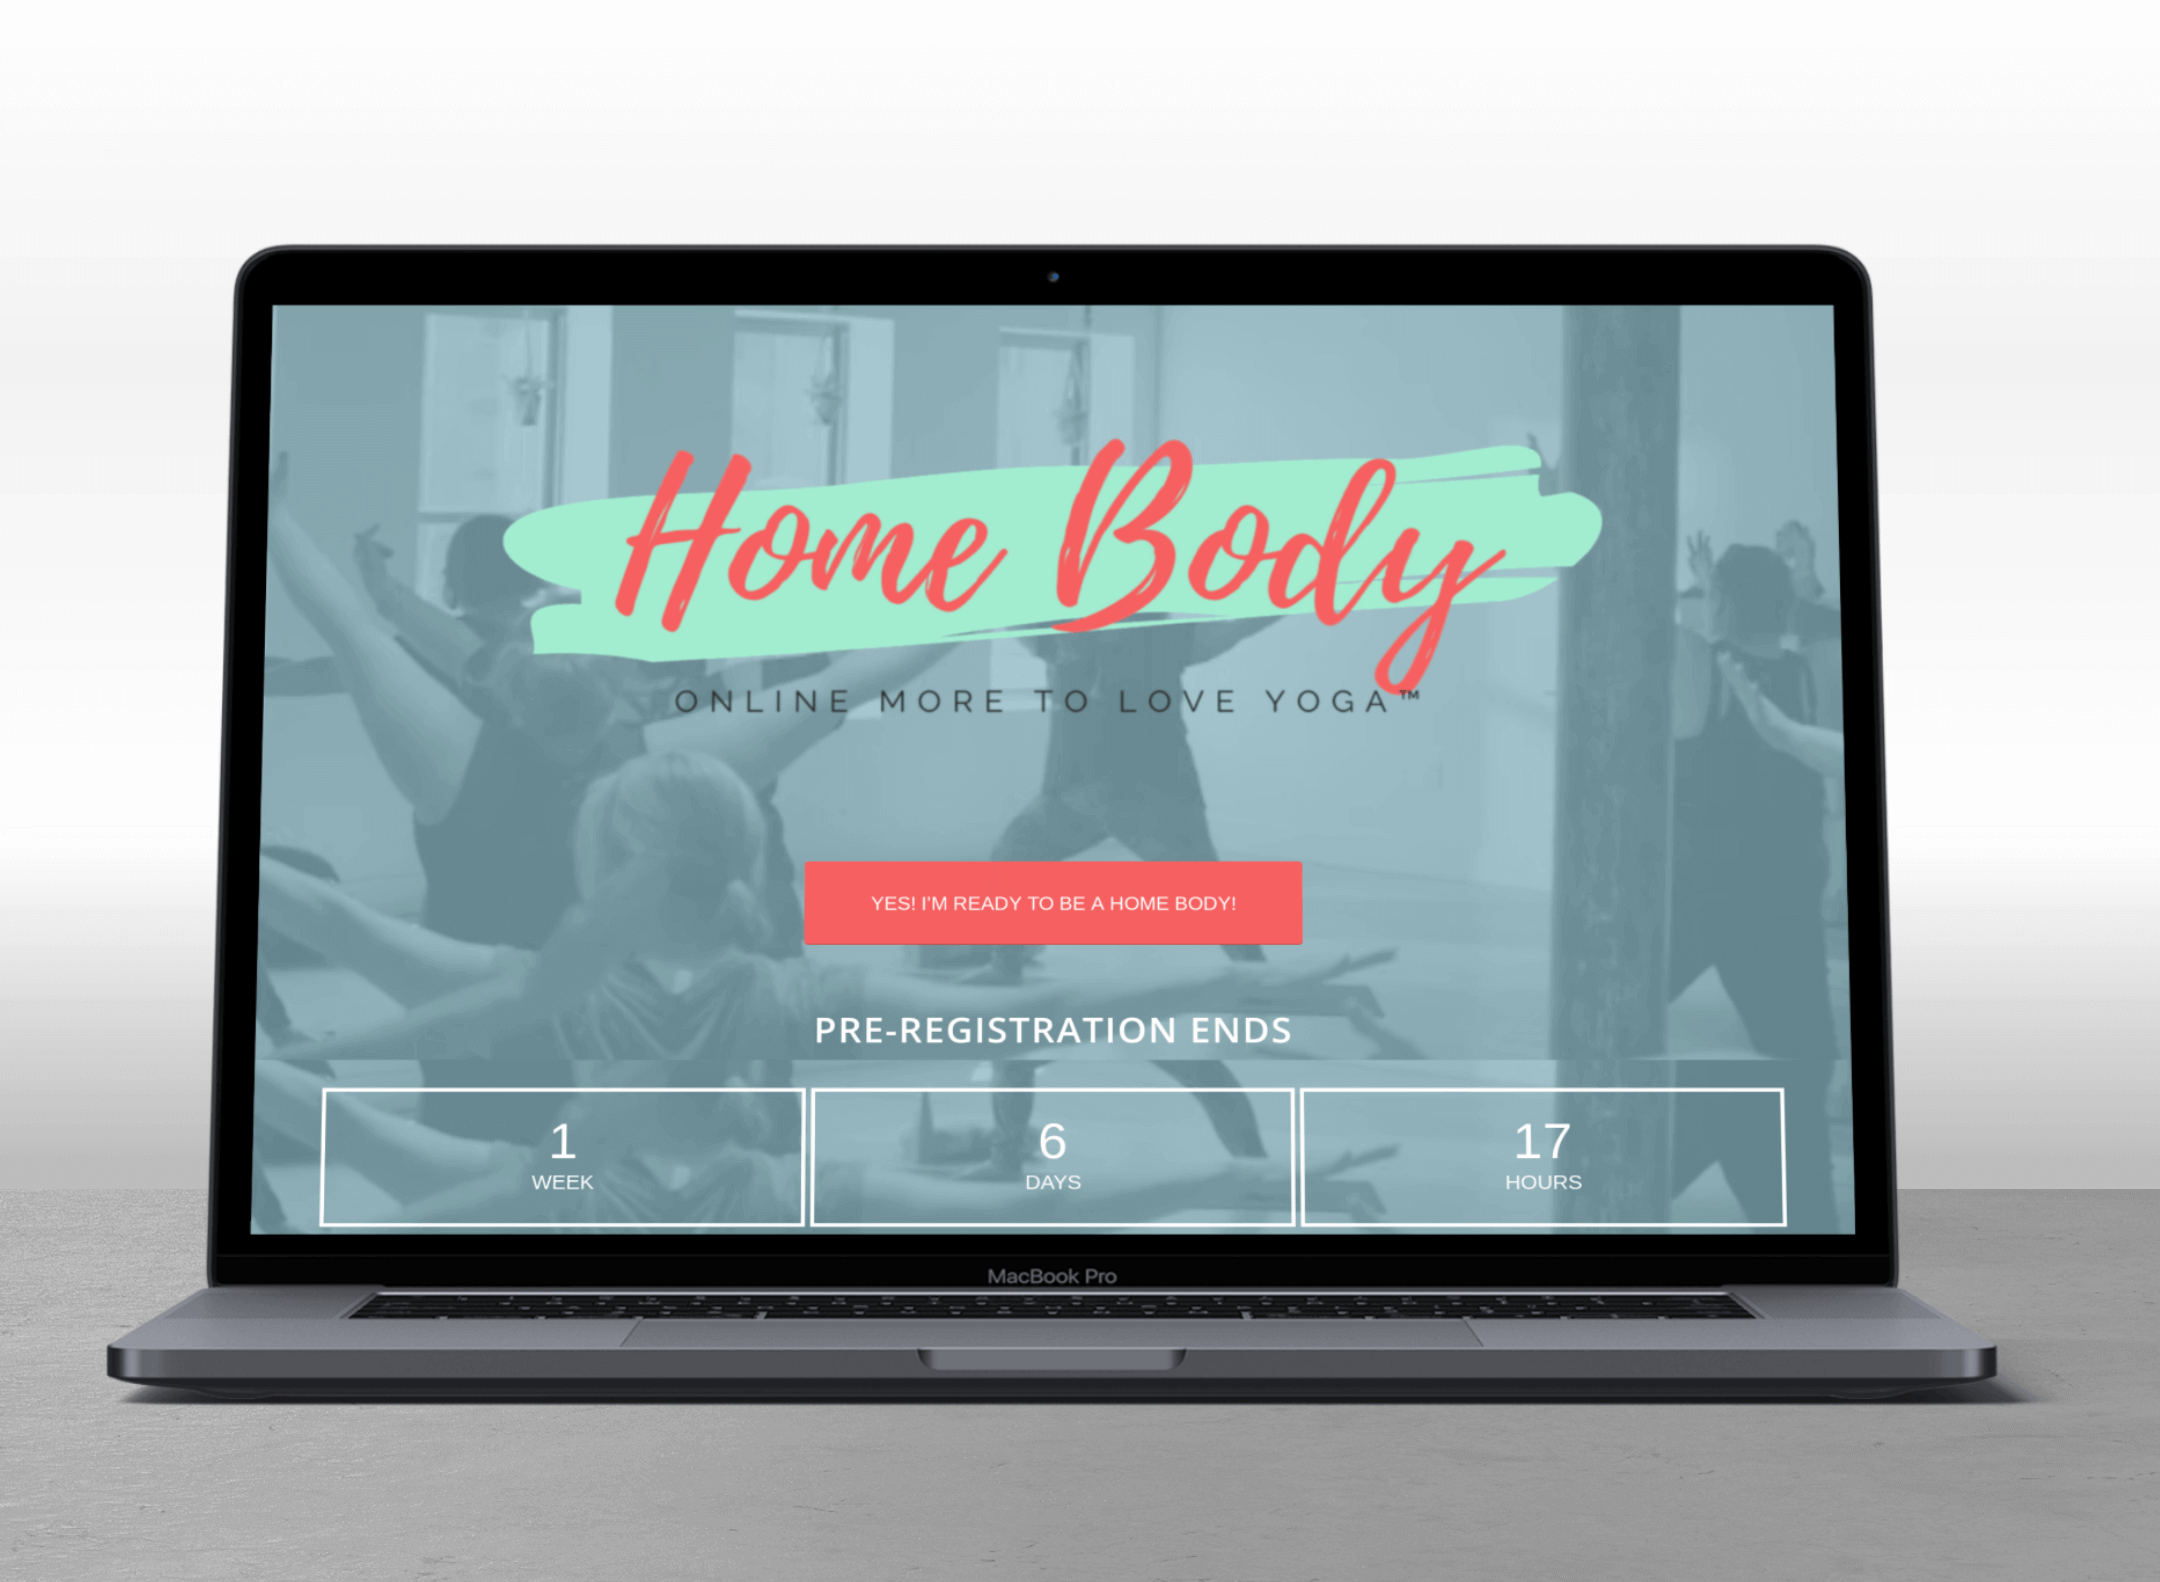 Home Body by More to Love Yoga